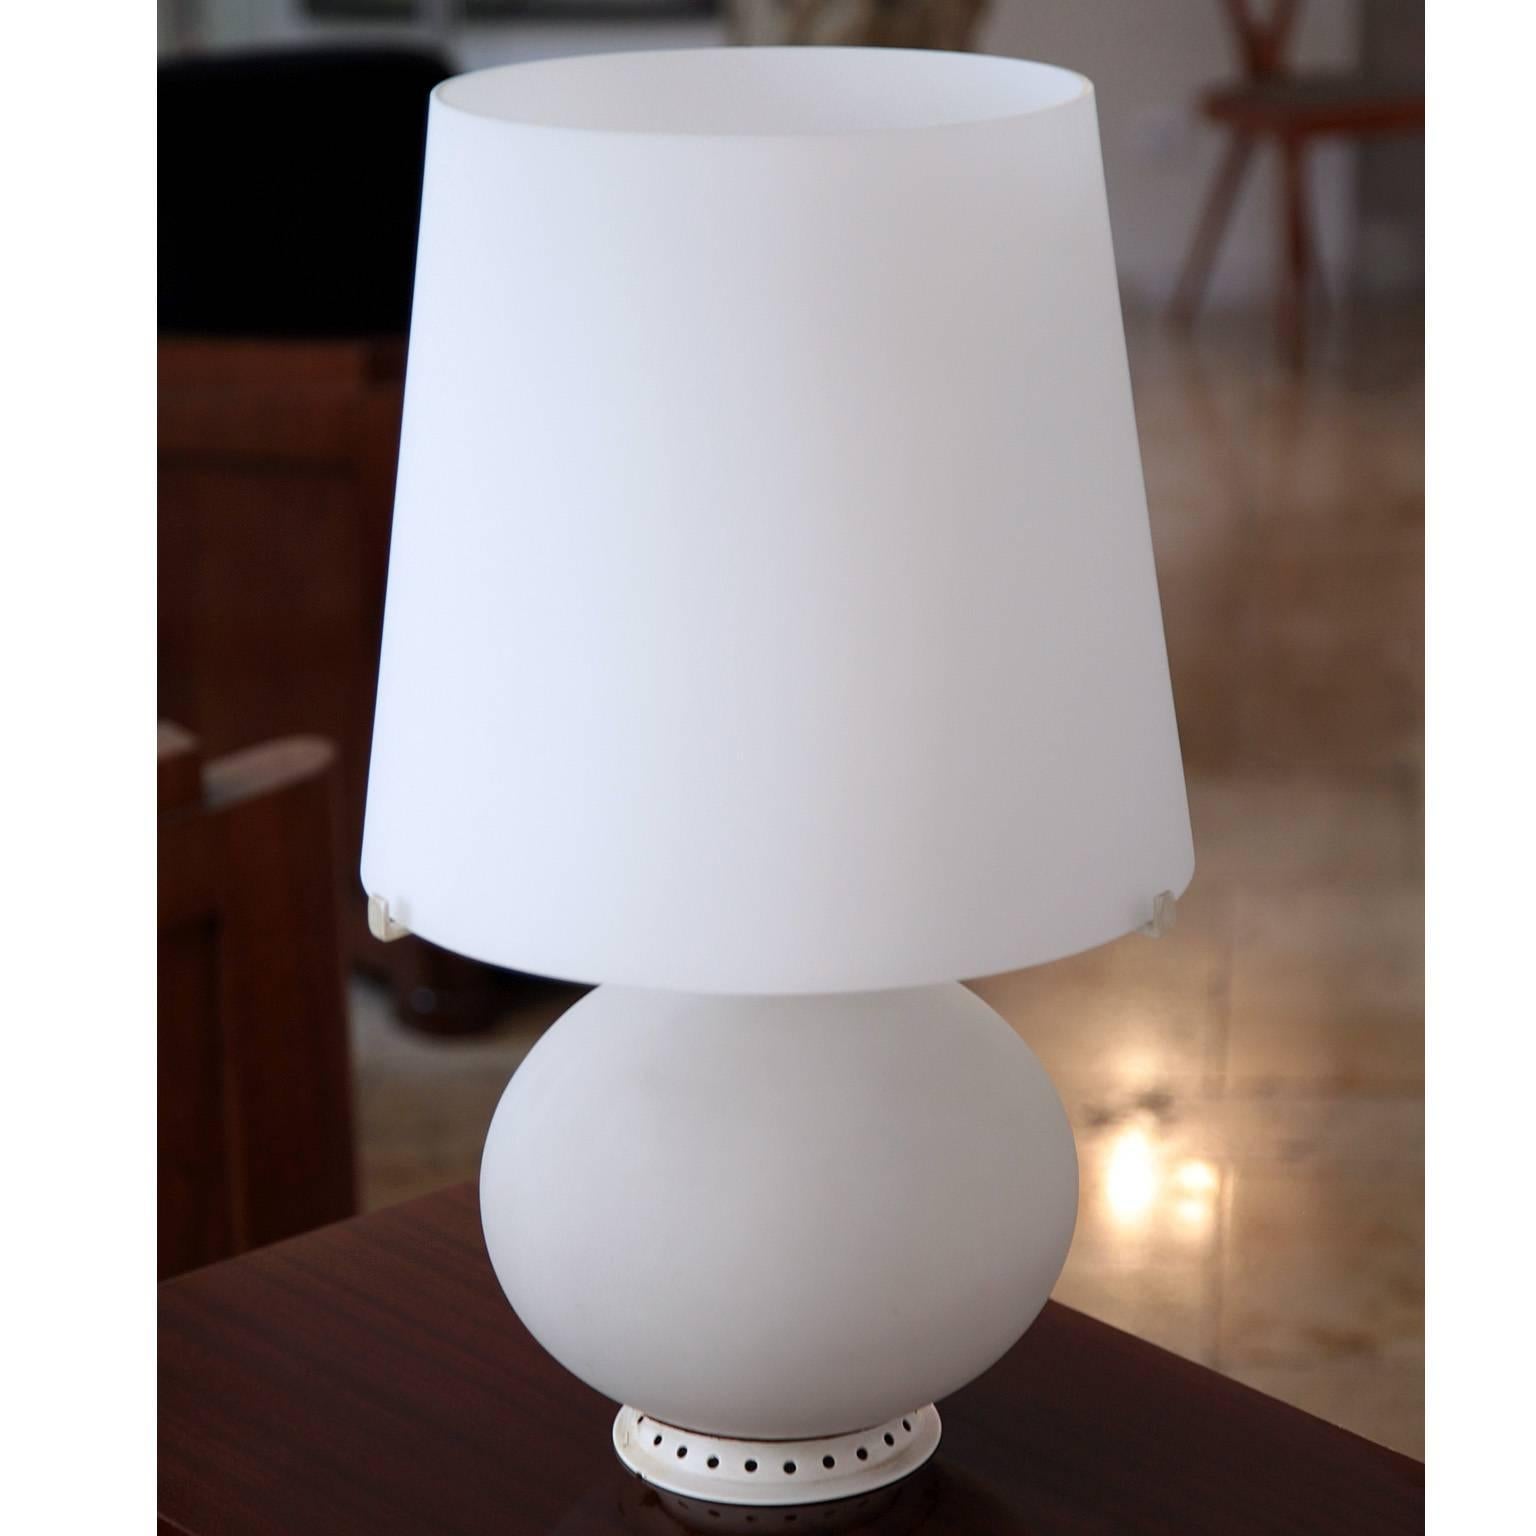 Fontana 1853/1 lamp by Max Ingrand designed for Fontana Arte in 1954. The lamp stands on a round metal stand with hole structure. The body and lampshade is opaque glass. This is the middle sized type.

For the electrification we assume no liability